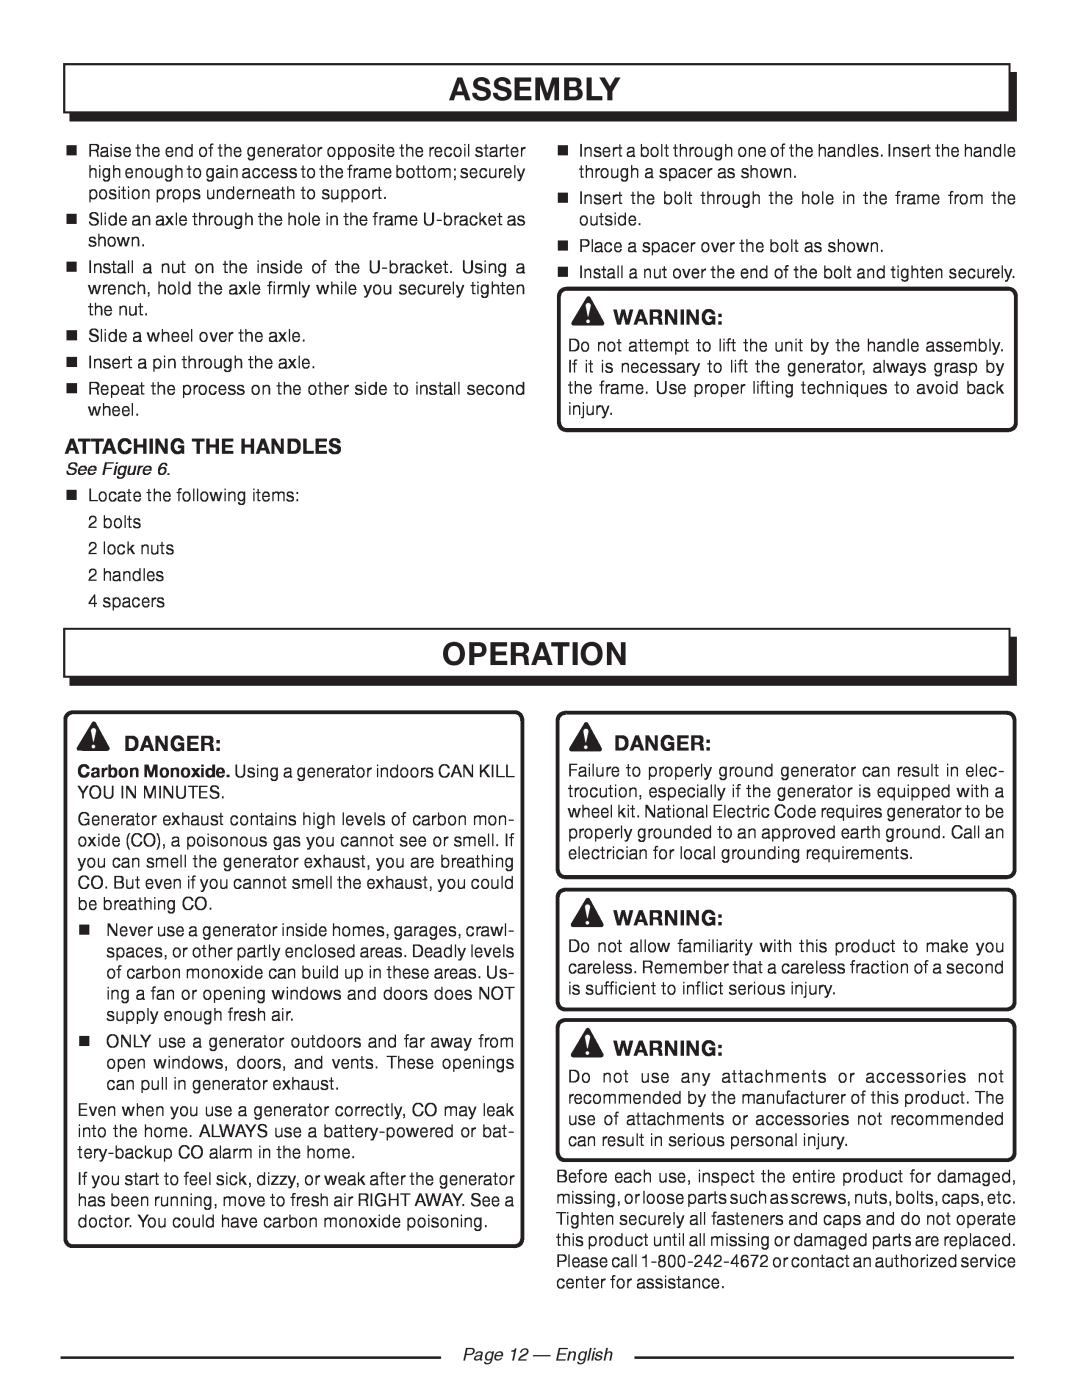 Homelite HGCA5000 Operation, Attaching The Handles, Dangerdanger, Page 12 - English, Assembly, See Figure 